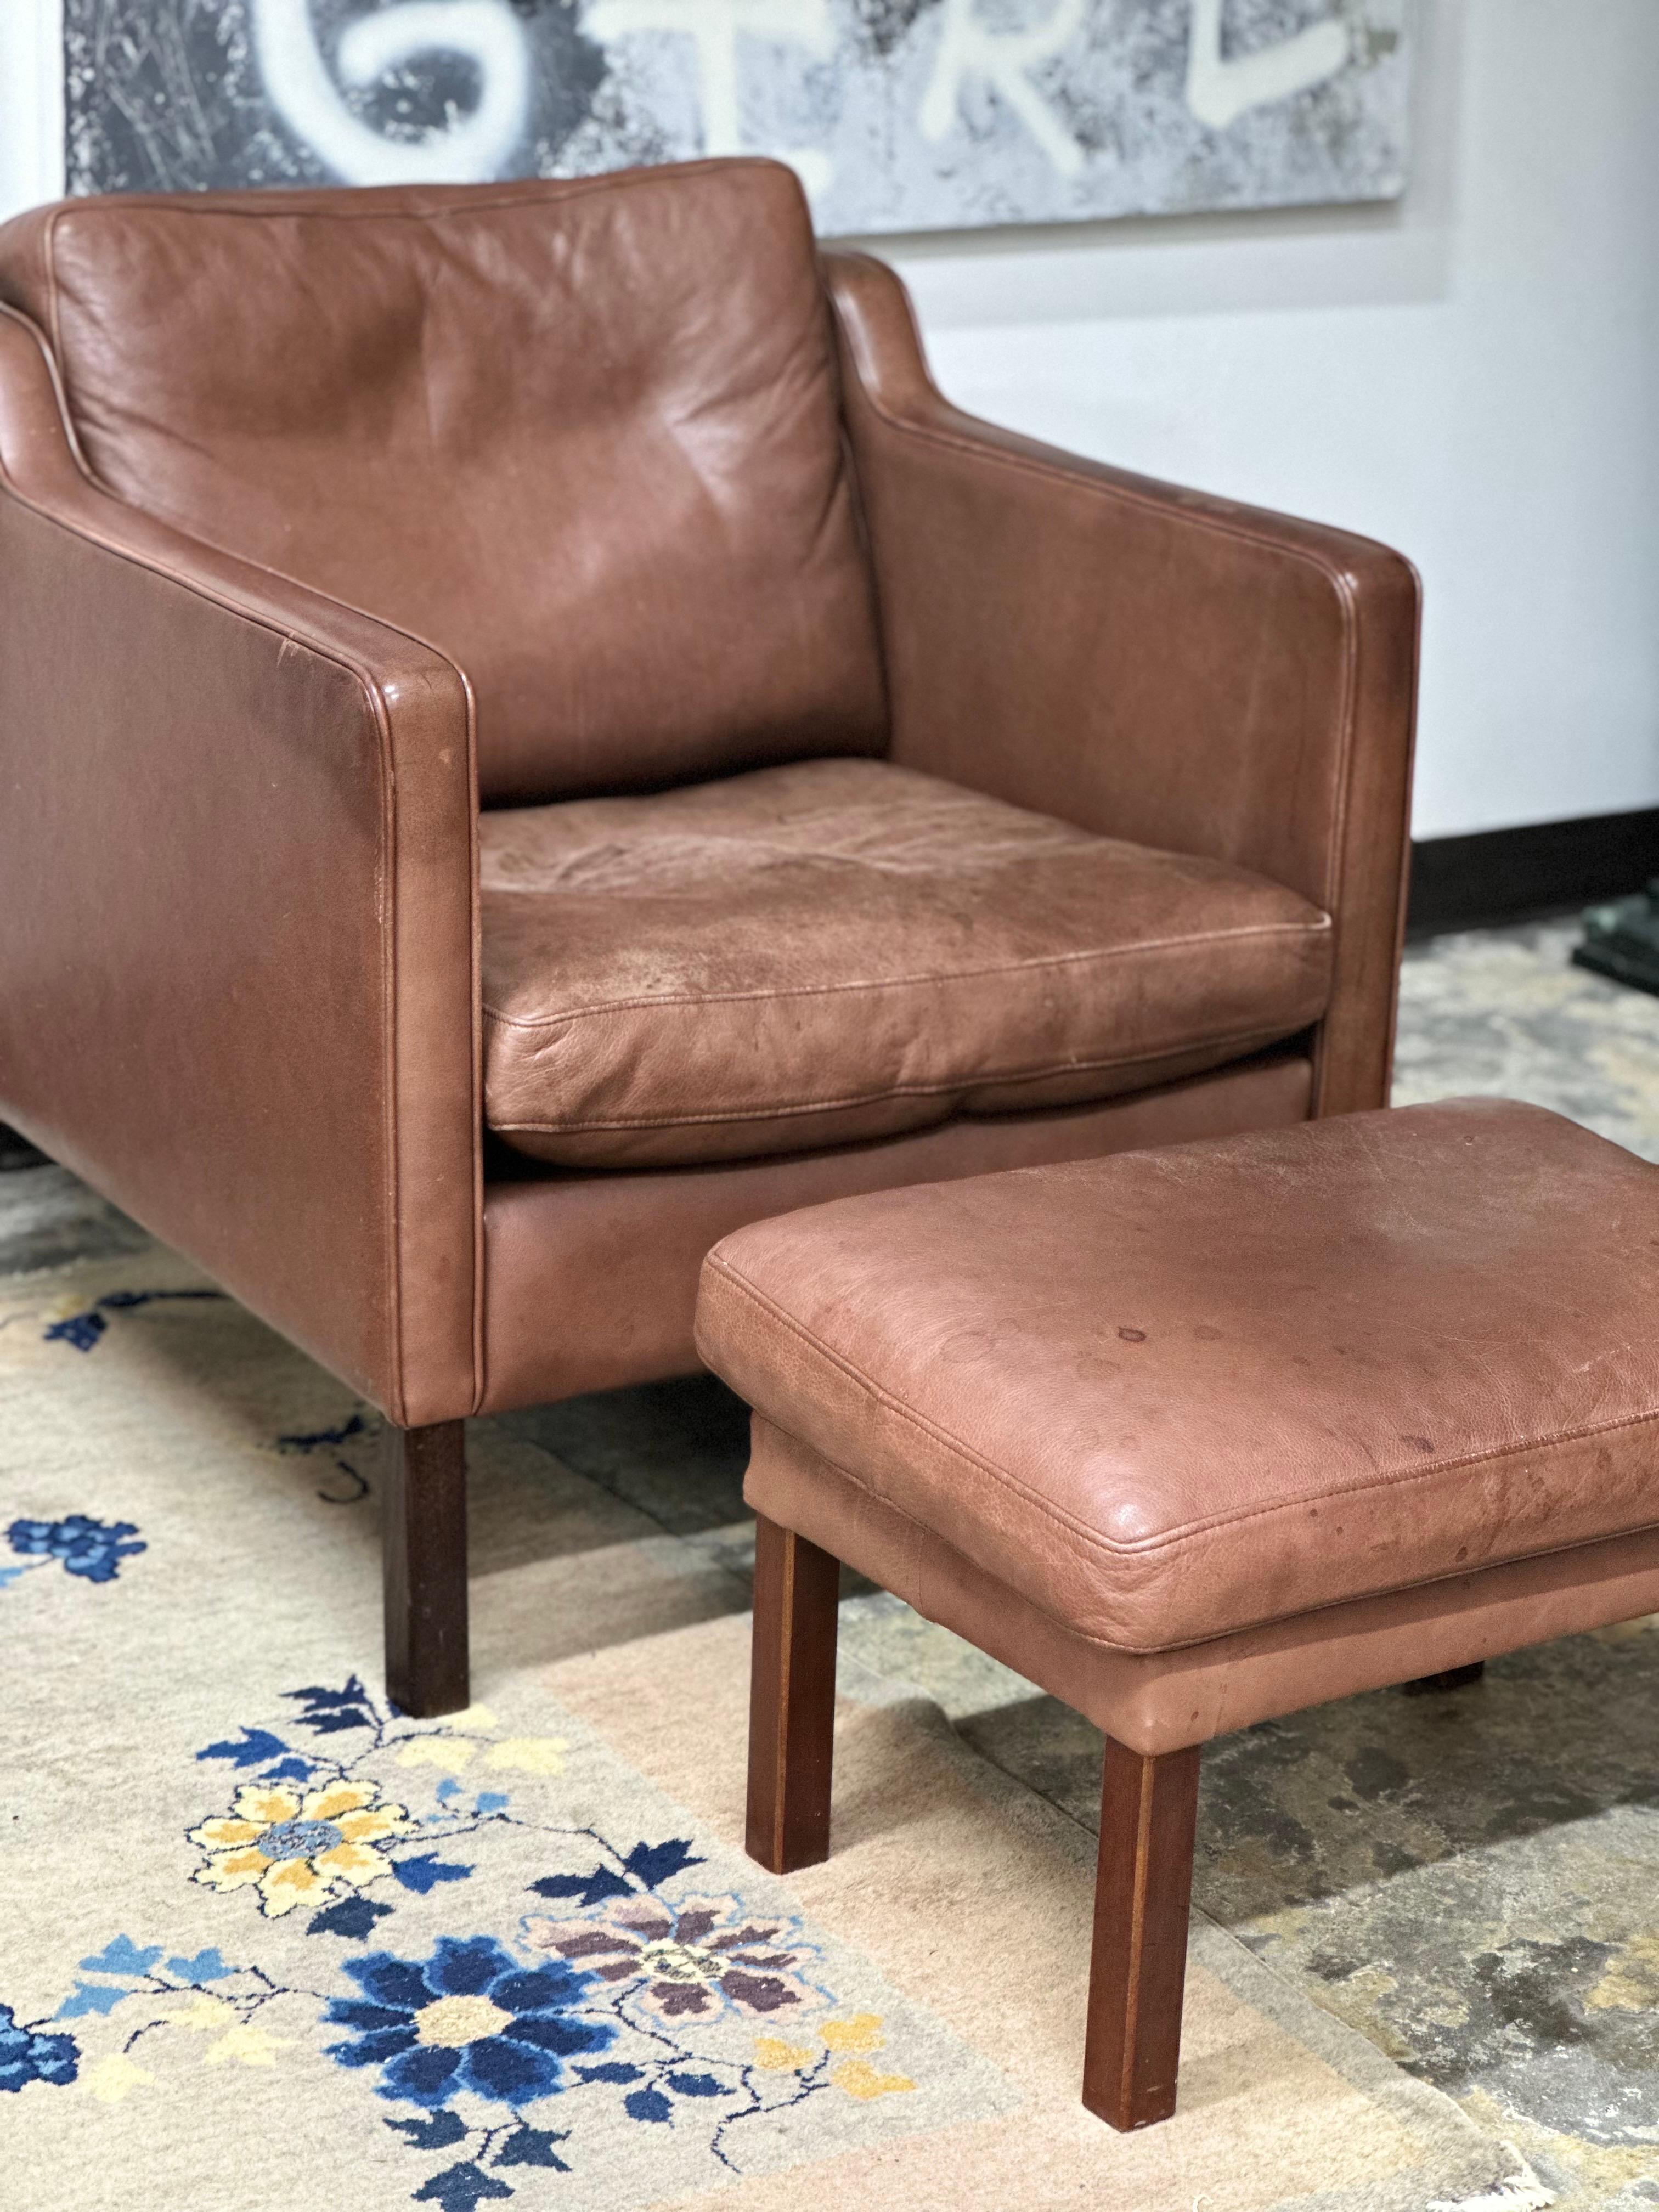 Leather chair and ottoman by Stouby. Minor staining and discoloration consistent with age. One blemish on chair left arm from adhesive of tape.

Ottoman measurments:
16